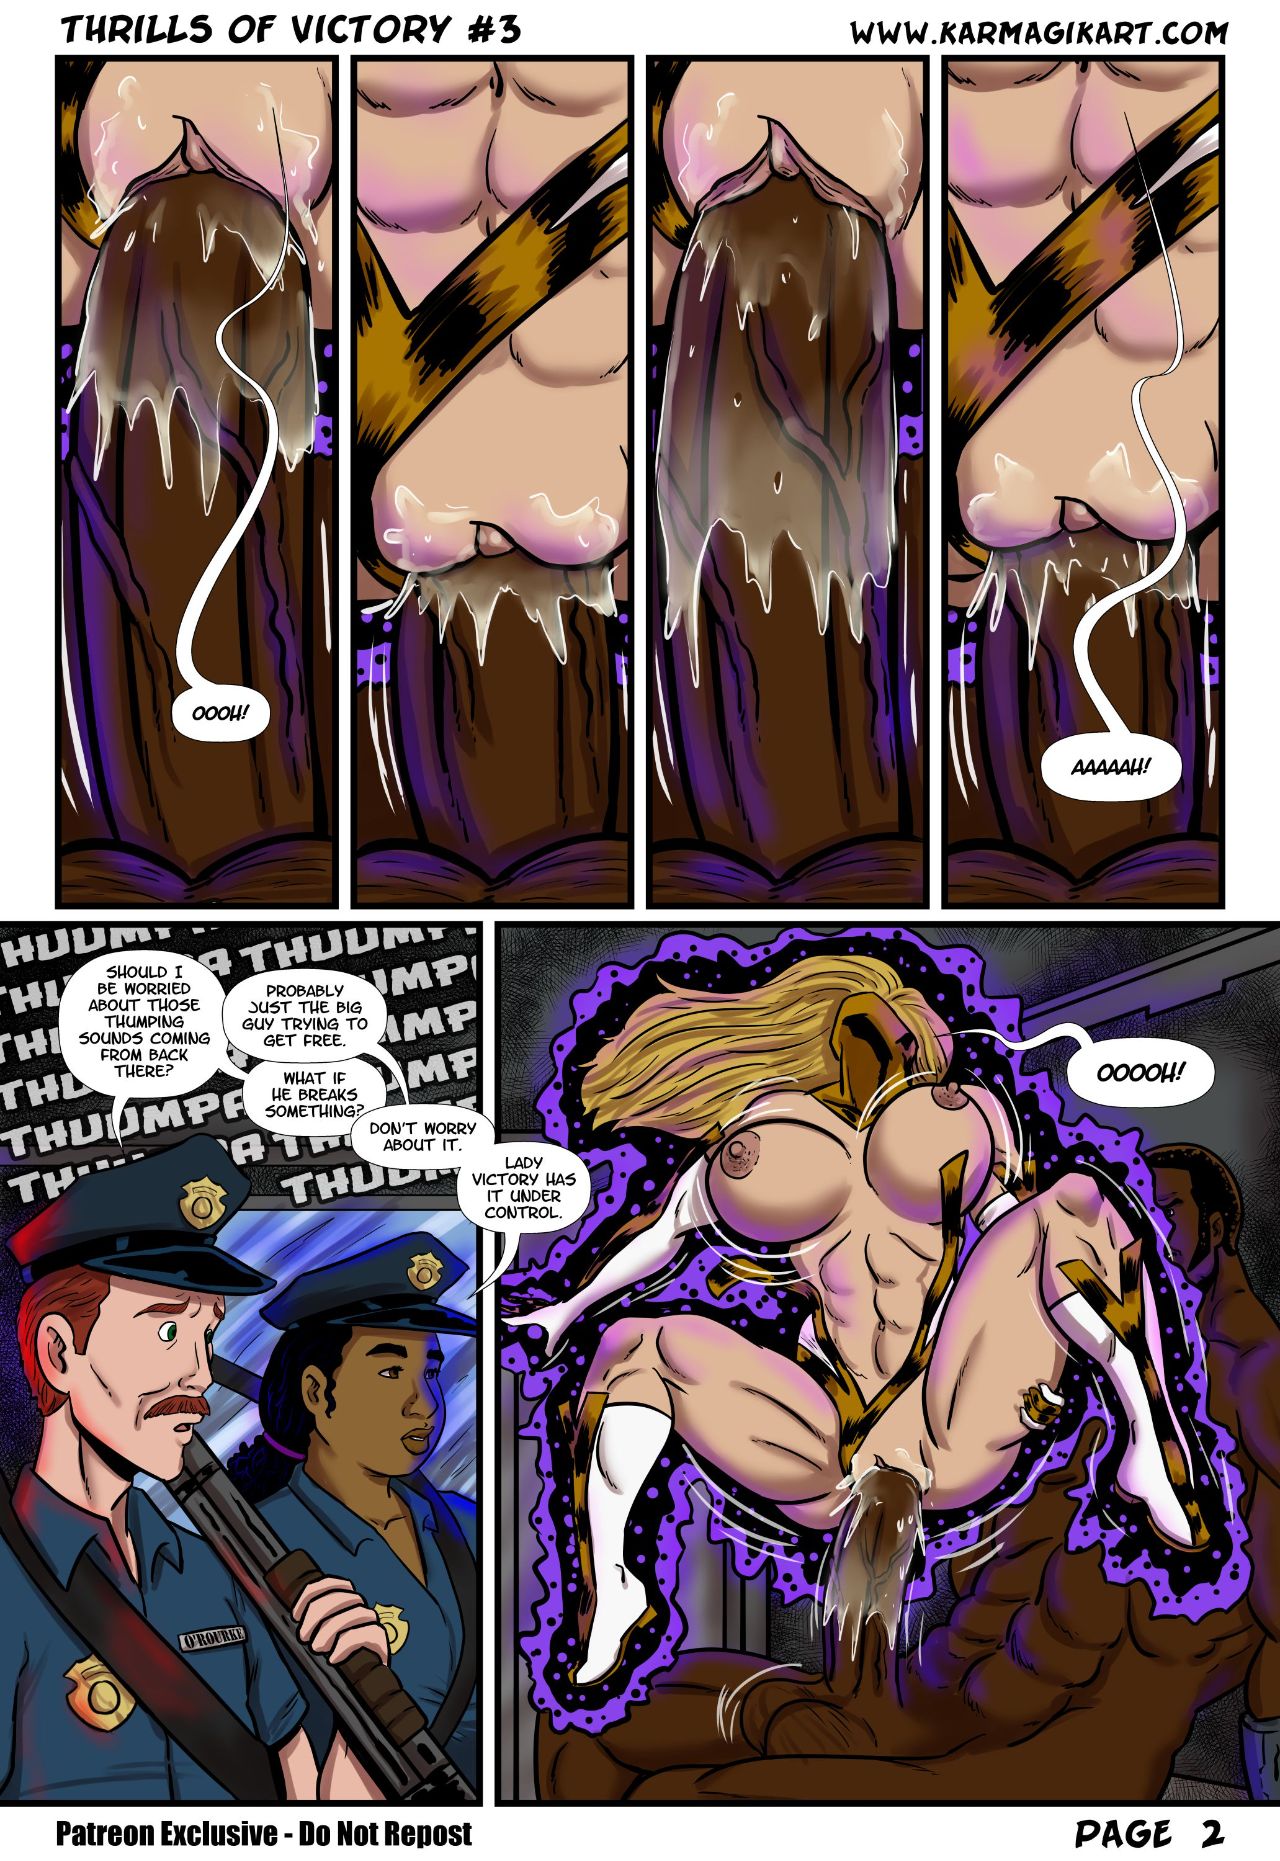 The Thrills Of Victory Part 3.5 Porn Comic english 03